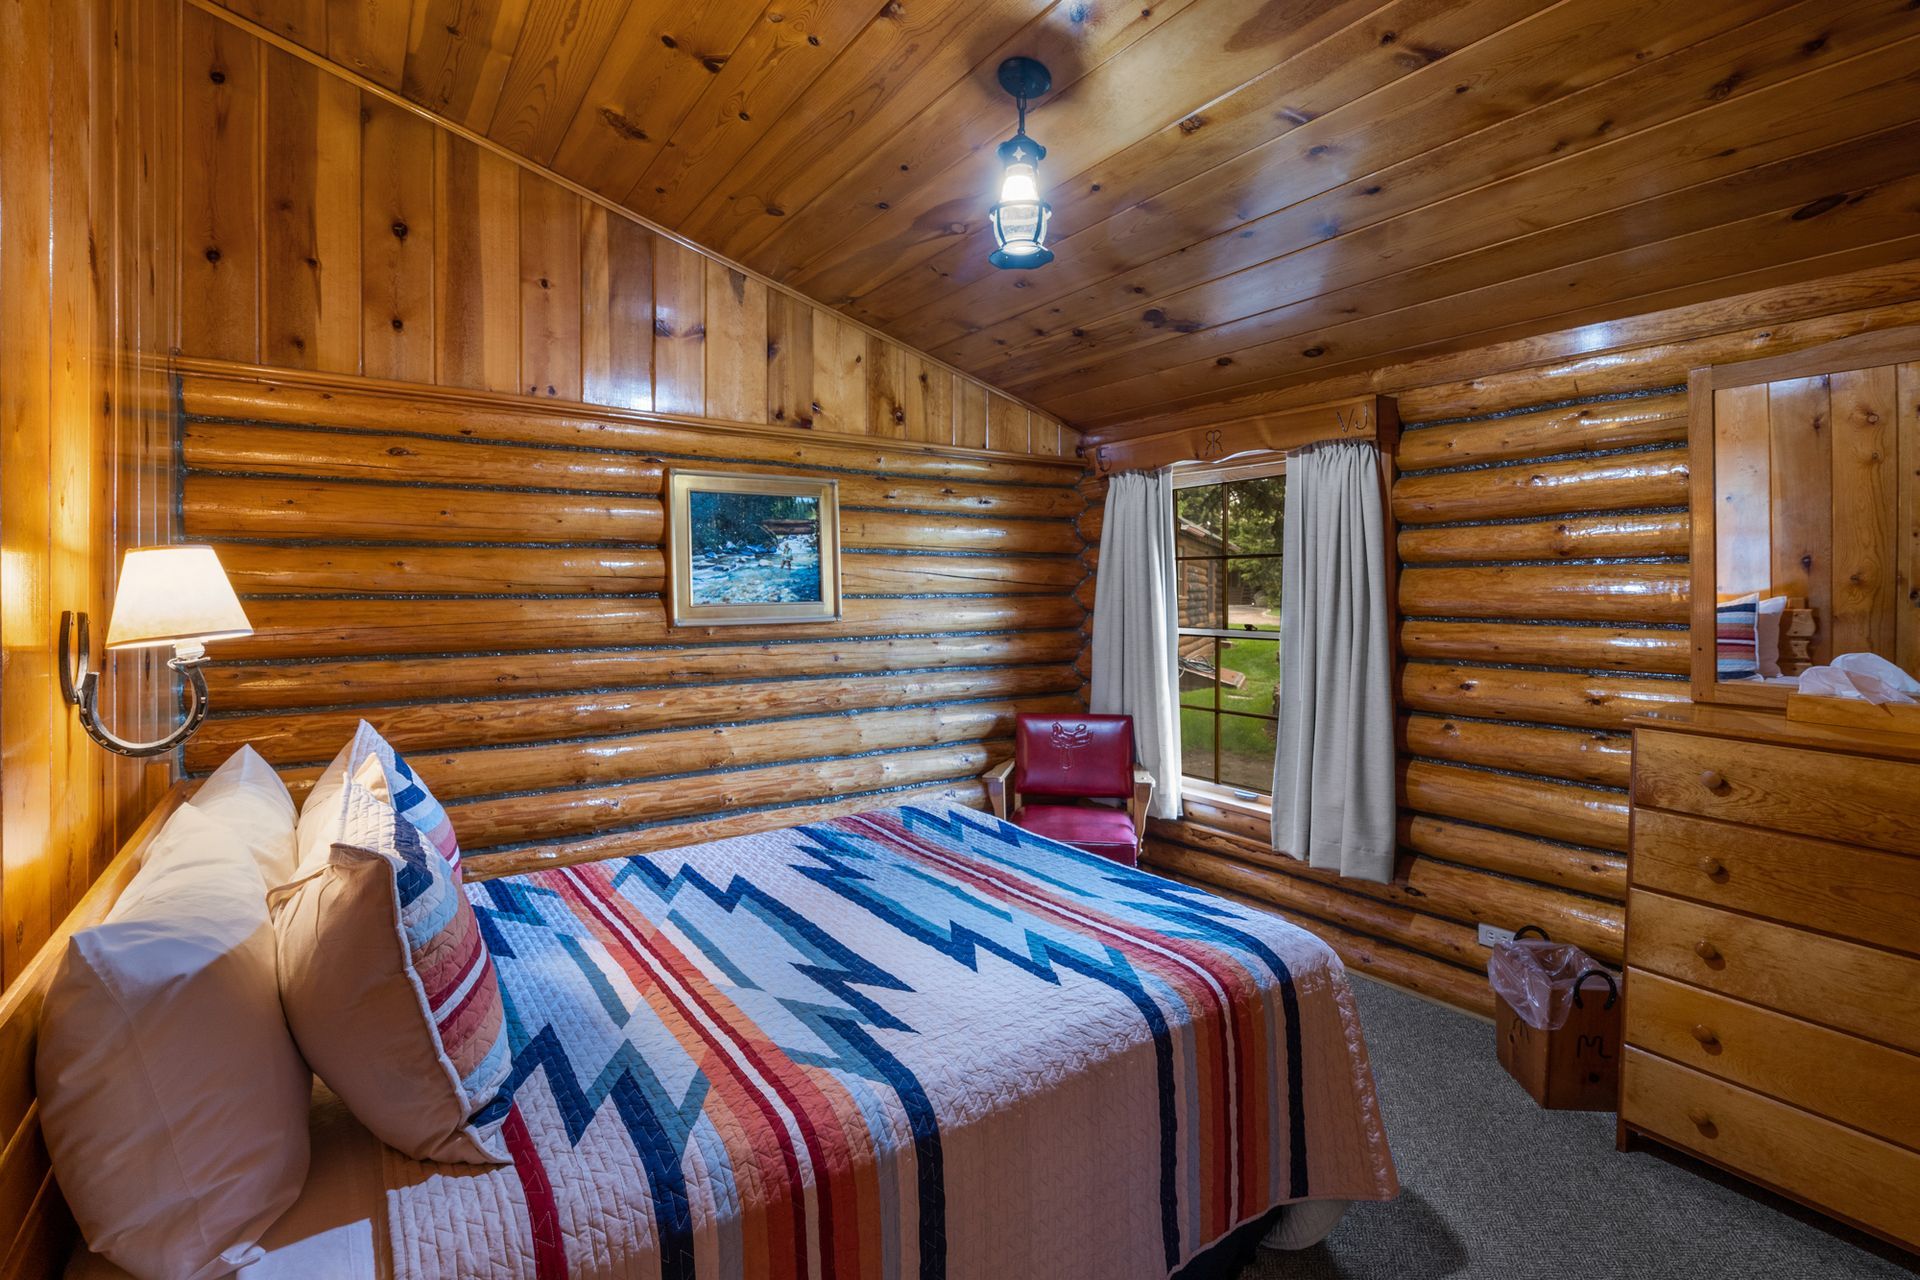 A bedroom in a log cabin with a bed , dresser , chair and mirror.